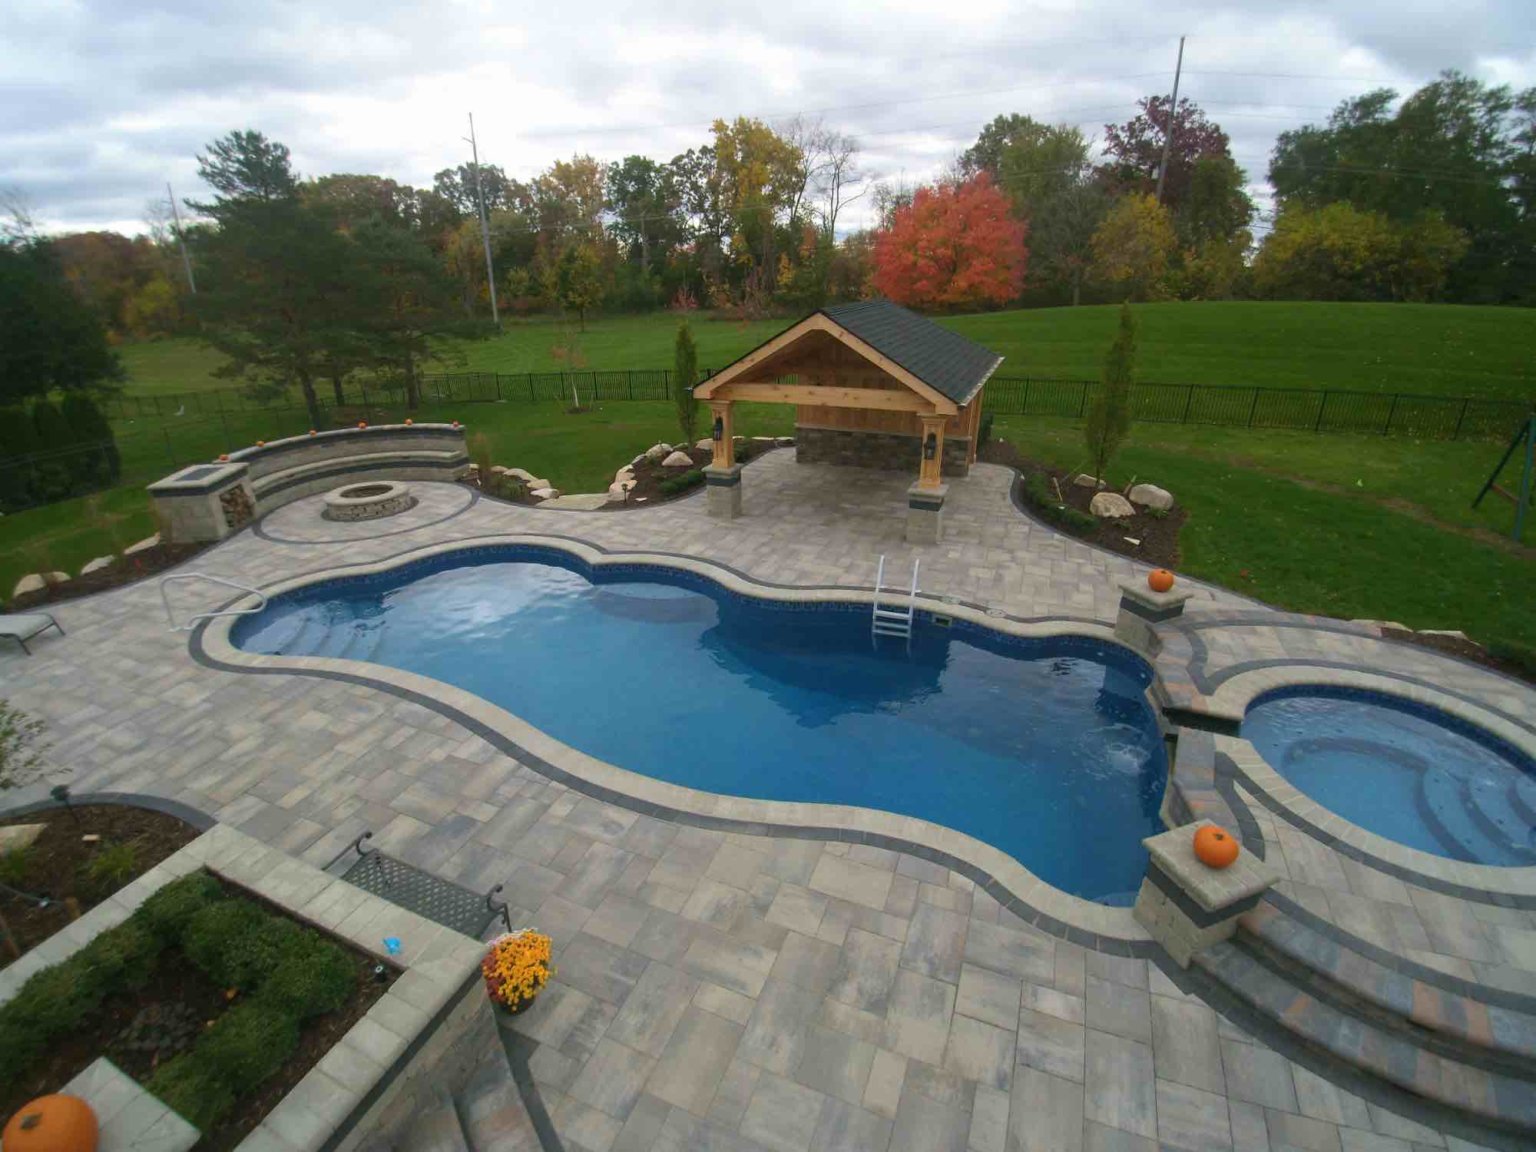 Outdoor Fire Features Fire Pit Designs Fire Feature Ideas Gas Fire Pits Outdoor Fireplaces Fire Pit Installation shade structure builders michigan outdoor pavilion patio pavilion pavilion designers mi Gunite Pool Construction Custom Gunite Pool Designs Gunite Pool Installation Gunite Pool vs. Vinyl Pool Gunite Pool Benefits Gunite Pool Cost Gunite Pool Maintenance pool and spa design Metro Detroit Metro Detroit pool and spa experts Custom pool design Metro Detroit Spa installation in Metro Detroit Metro Detroit outdoor spa design Residential pool design Metro Detroit Metro Detroit luxury pool and spa Pool and spa renovation Metro Detroit Metro Detroit backyard pool design Metro Detroit pool and spa builders Metro Detroit pool and spa contractors